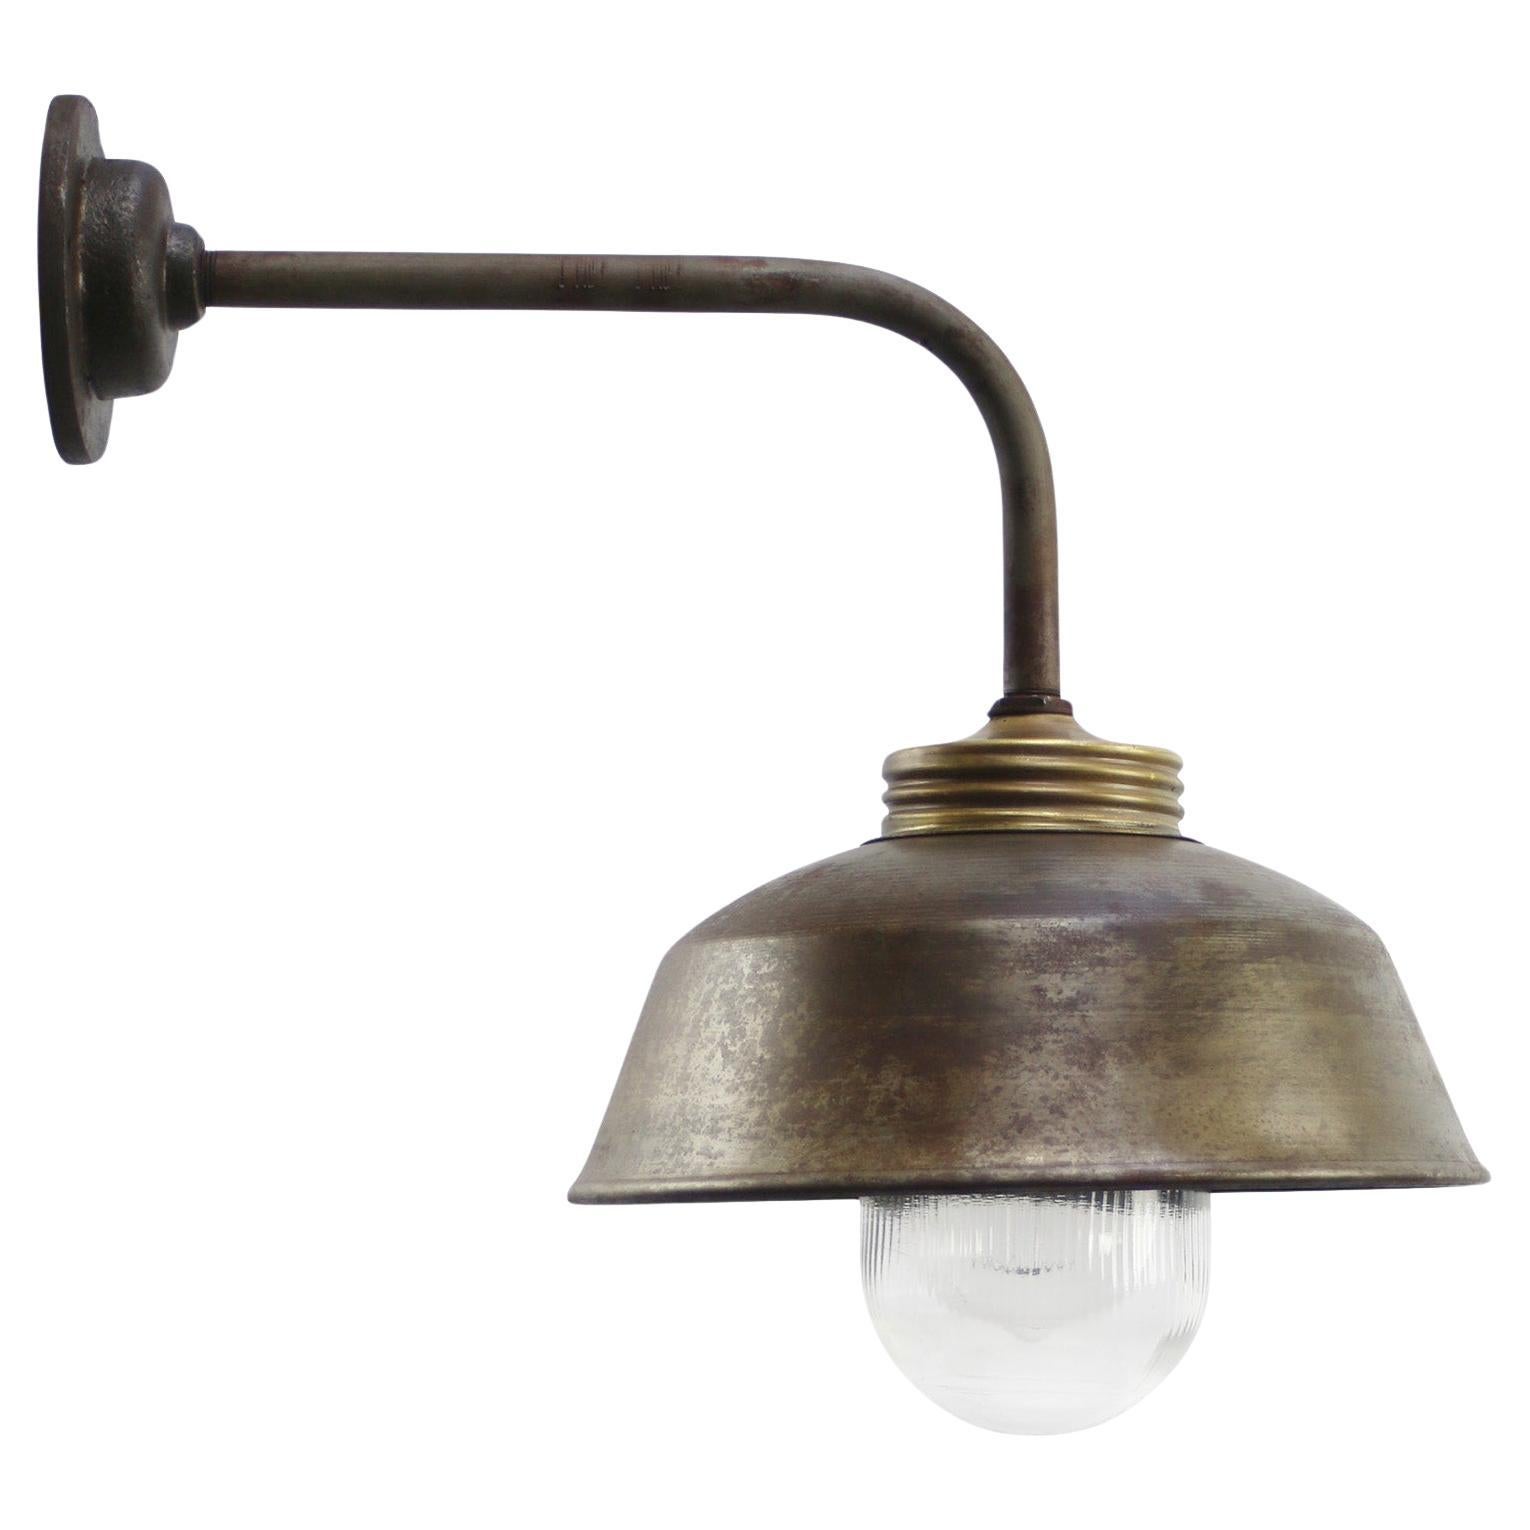 Cast Rust Iron Vintage Industrial Brass Clear Striped Glass Scones Wall Lights For Sale